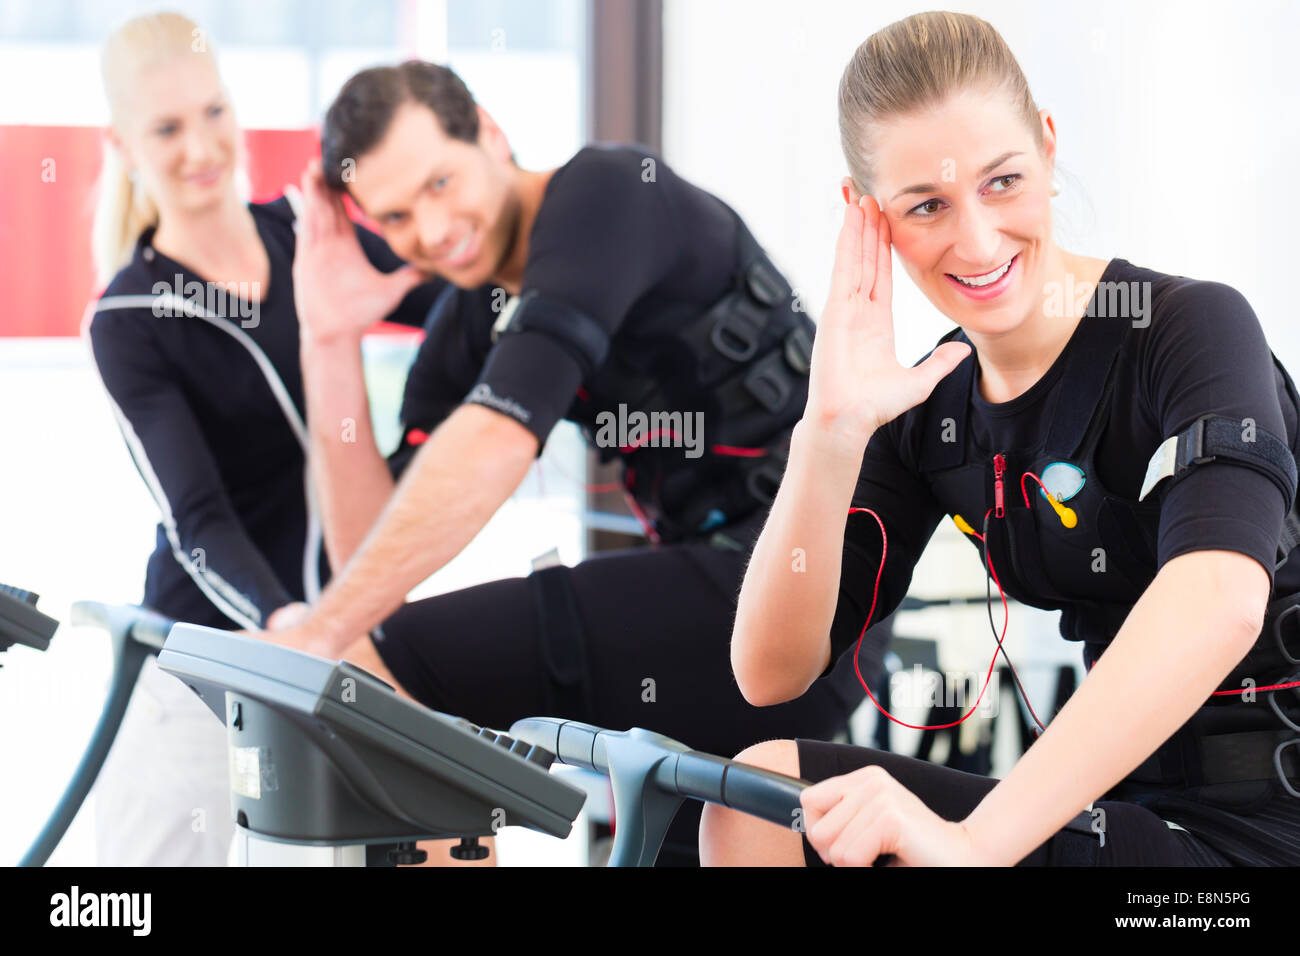 EMS Electro Stimulation Women Exercises with Coach in Modern Gym Stock  Image - Image of fitness, personal: 147937565